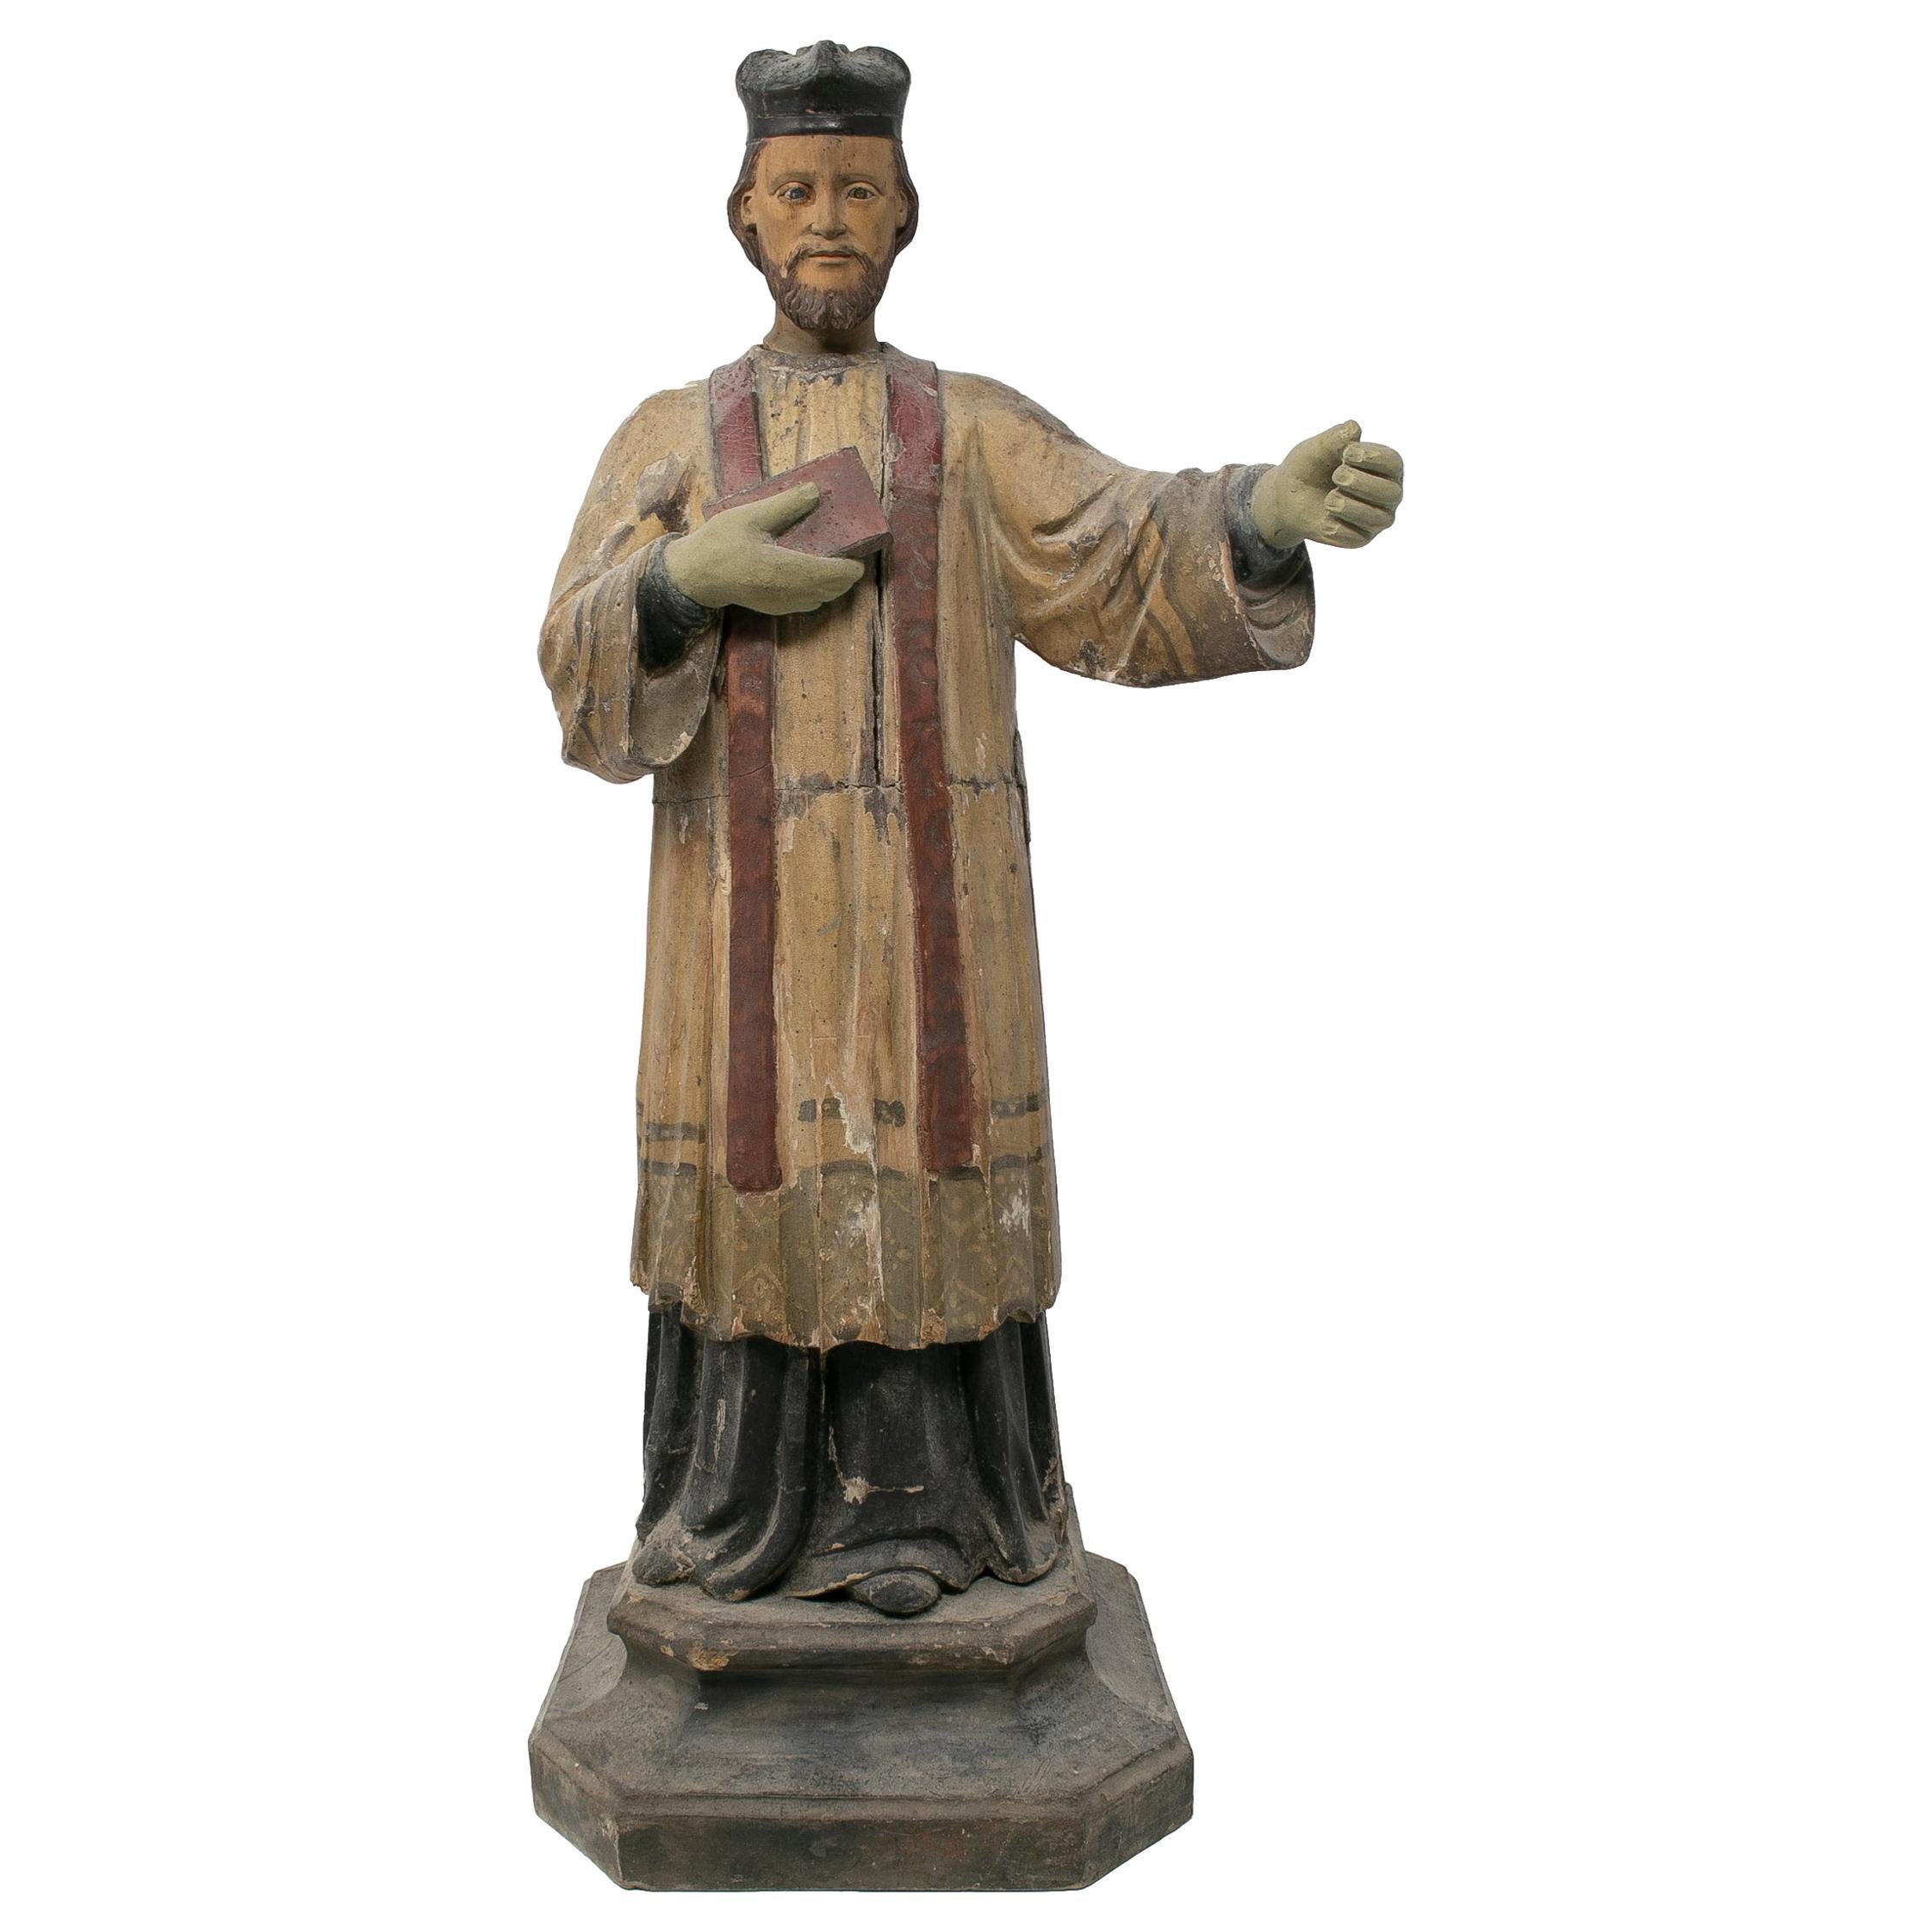 Mid-19th Century Spanish Saint Painted Wooden Figurative Sculpture For Sale